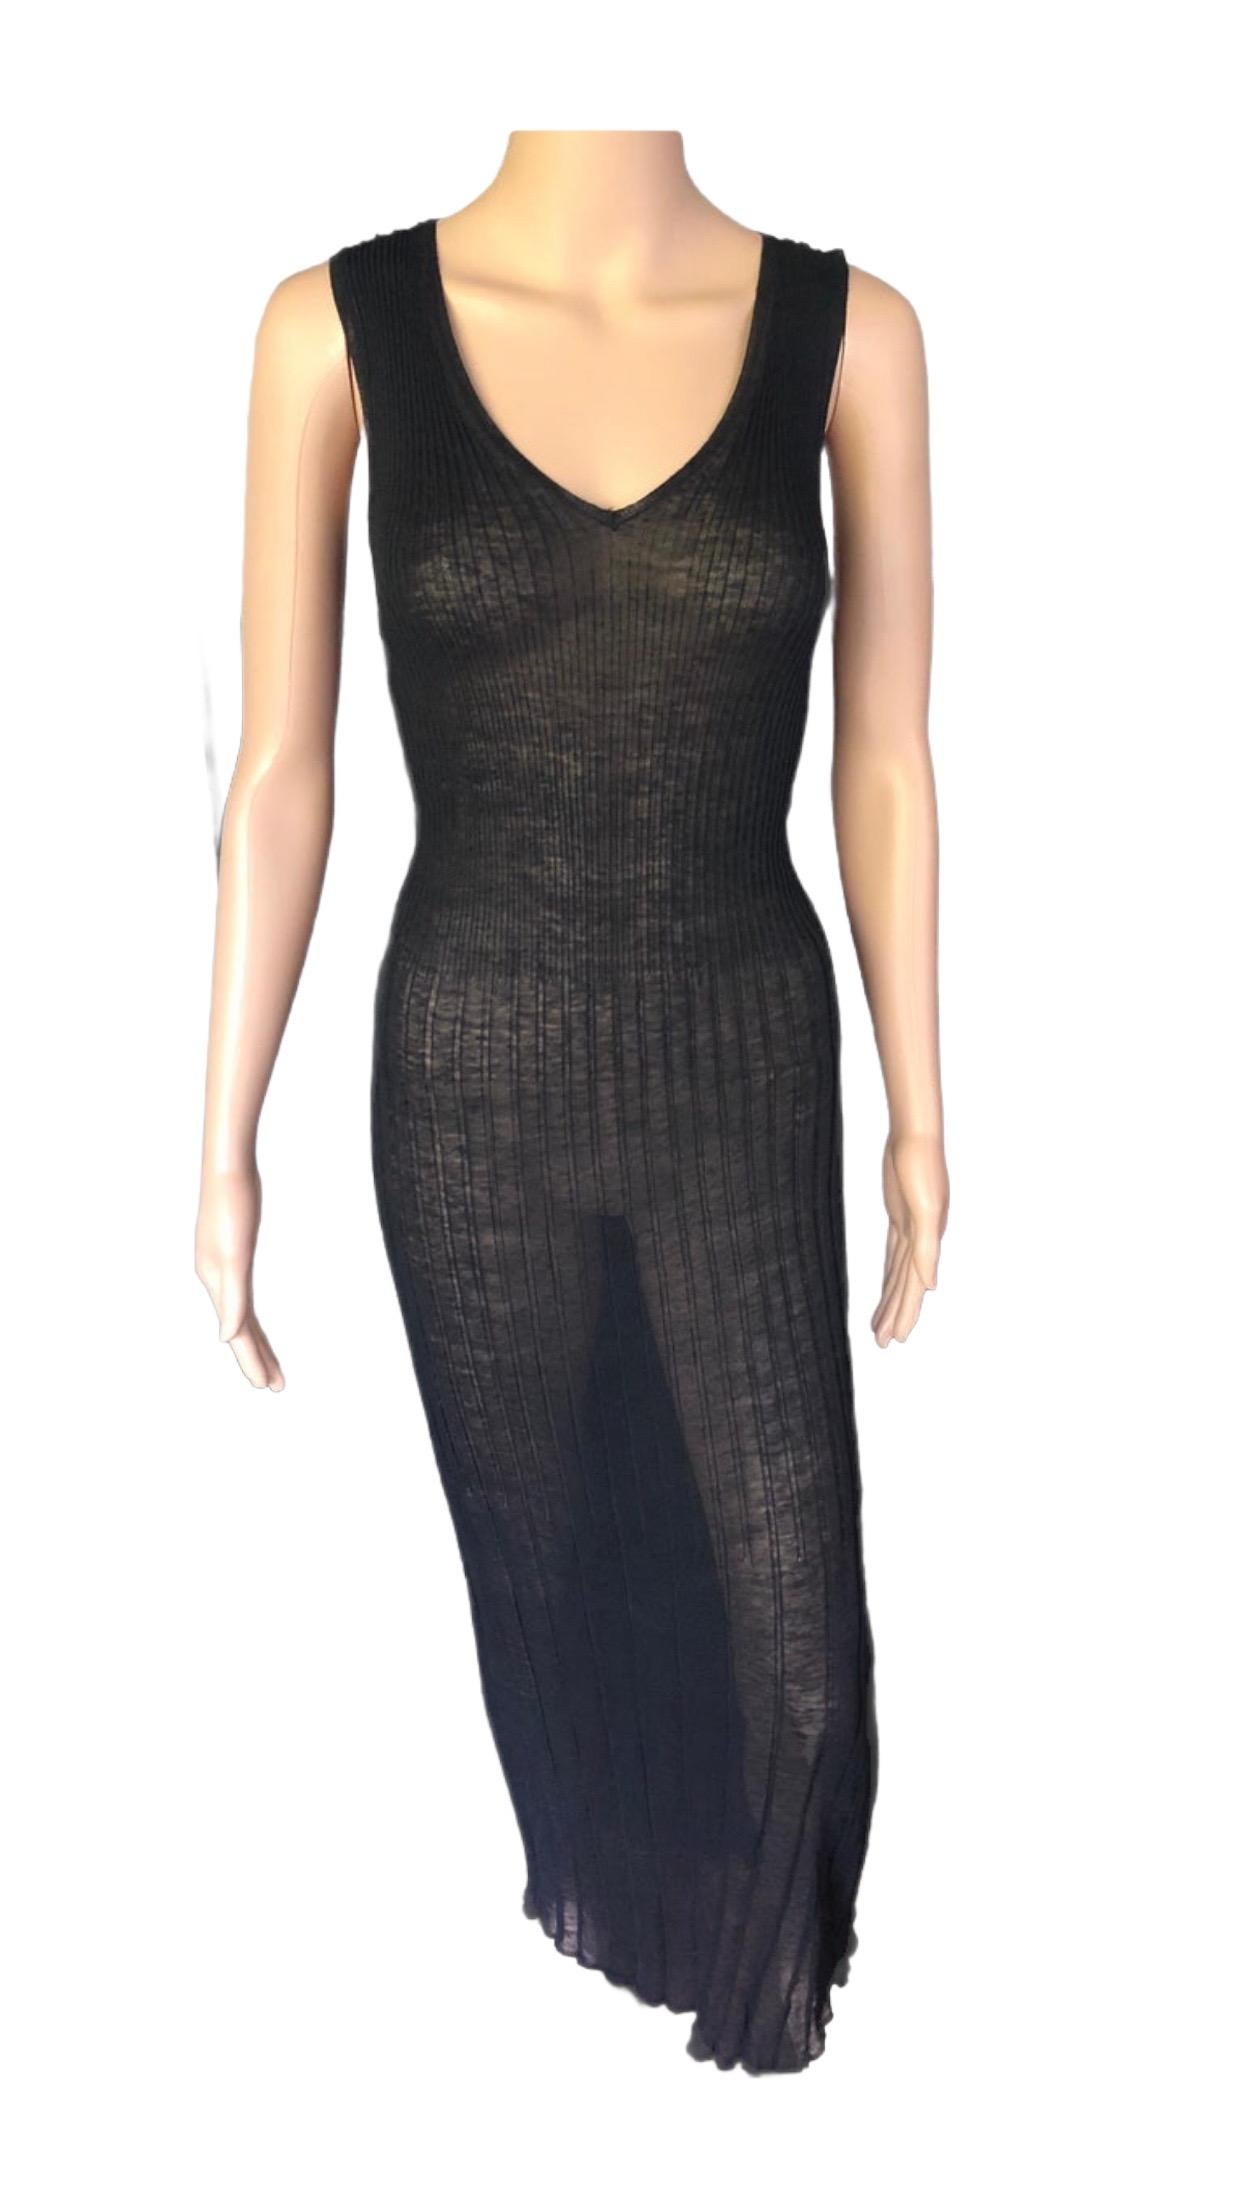 Chanel S/S 1999 Sheer Knit Mesh Black Maxi Dress Gown In Good Condition For Sale In Naples, FL